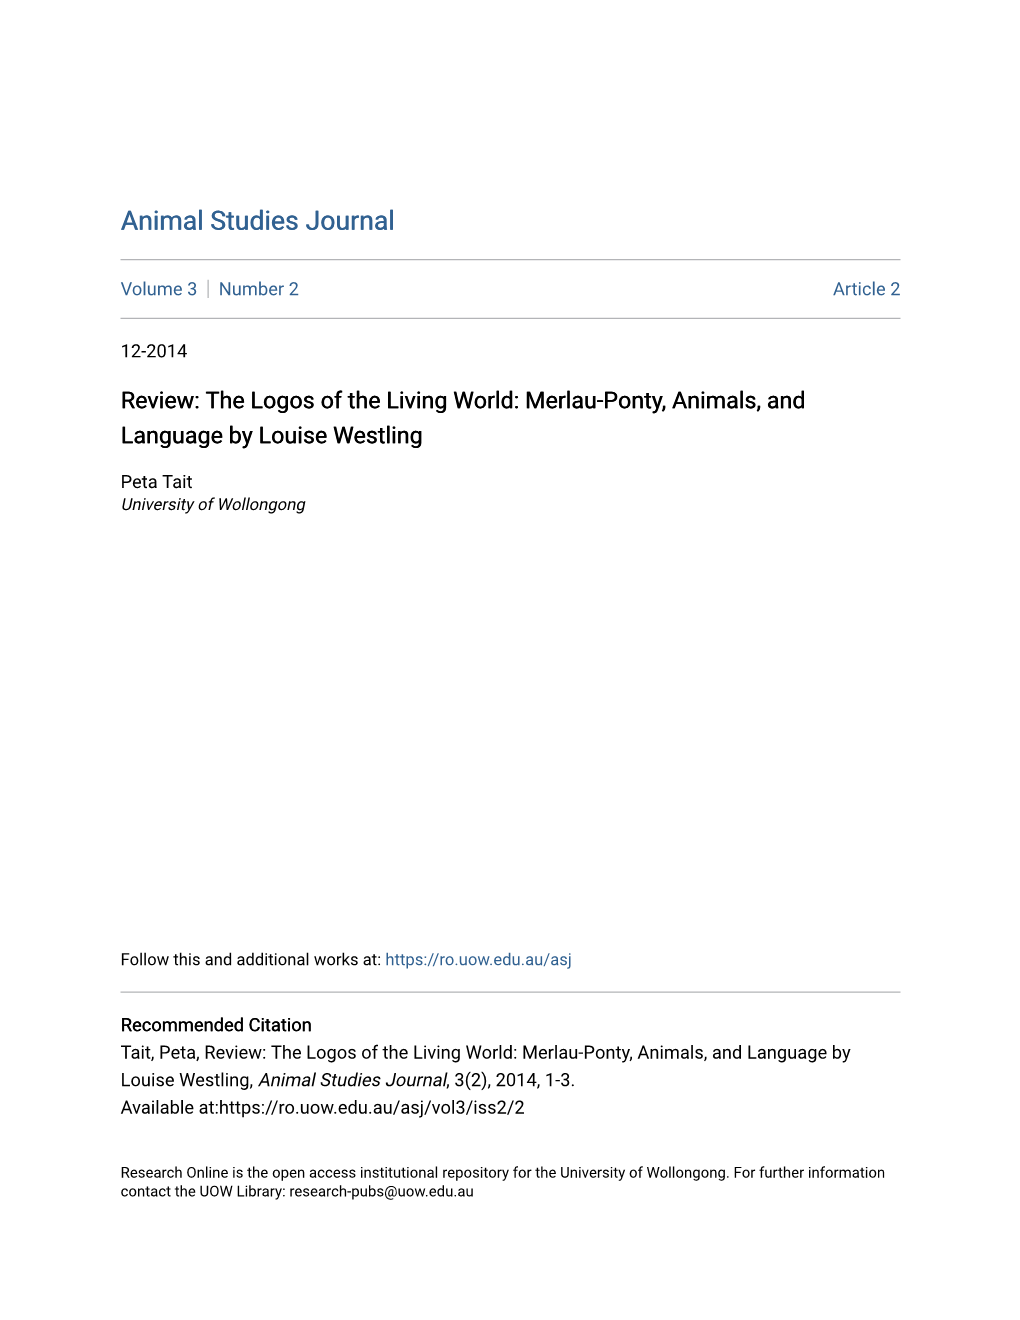 Review: the Logos of the Living World: Merlau-Ponty, Animals, and Language by Louise Westling